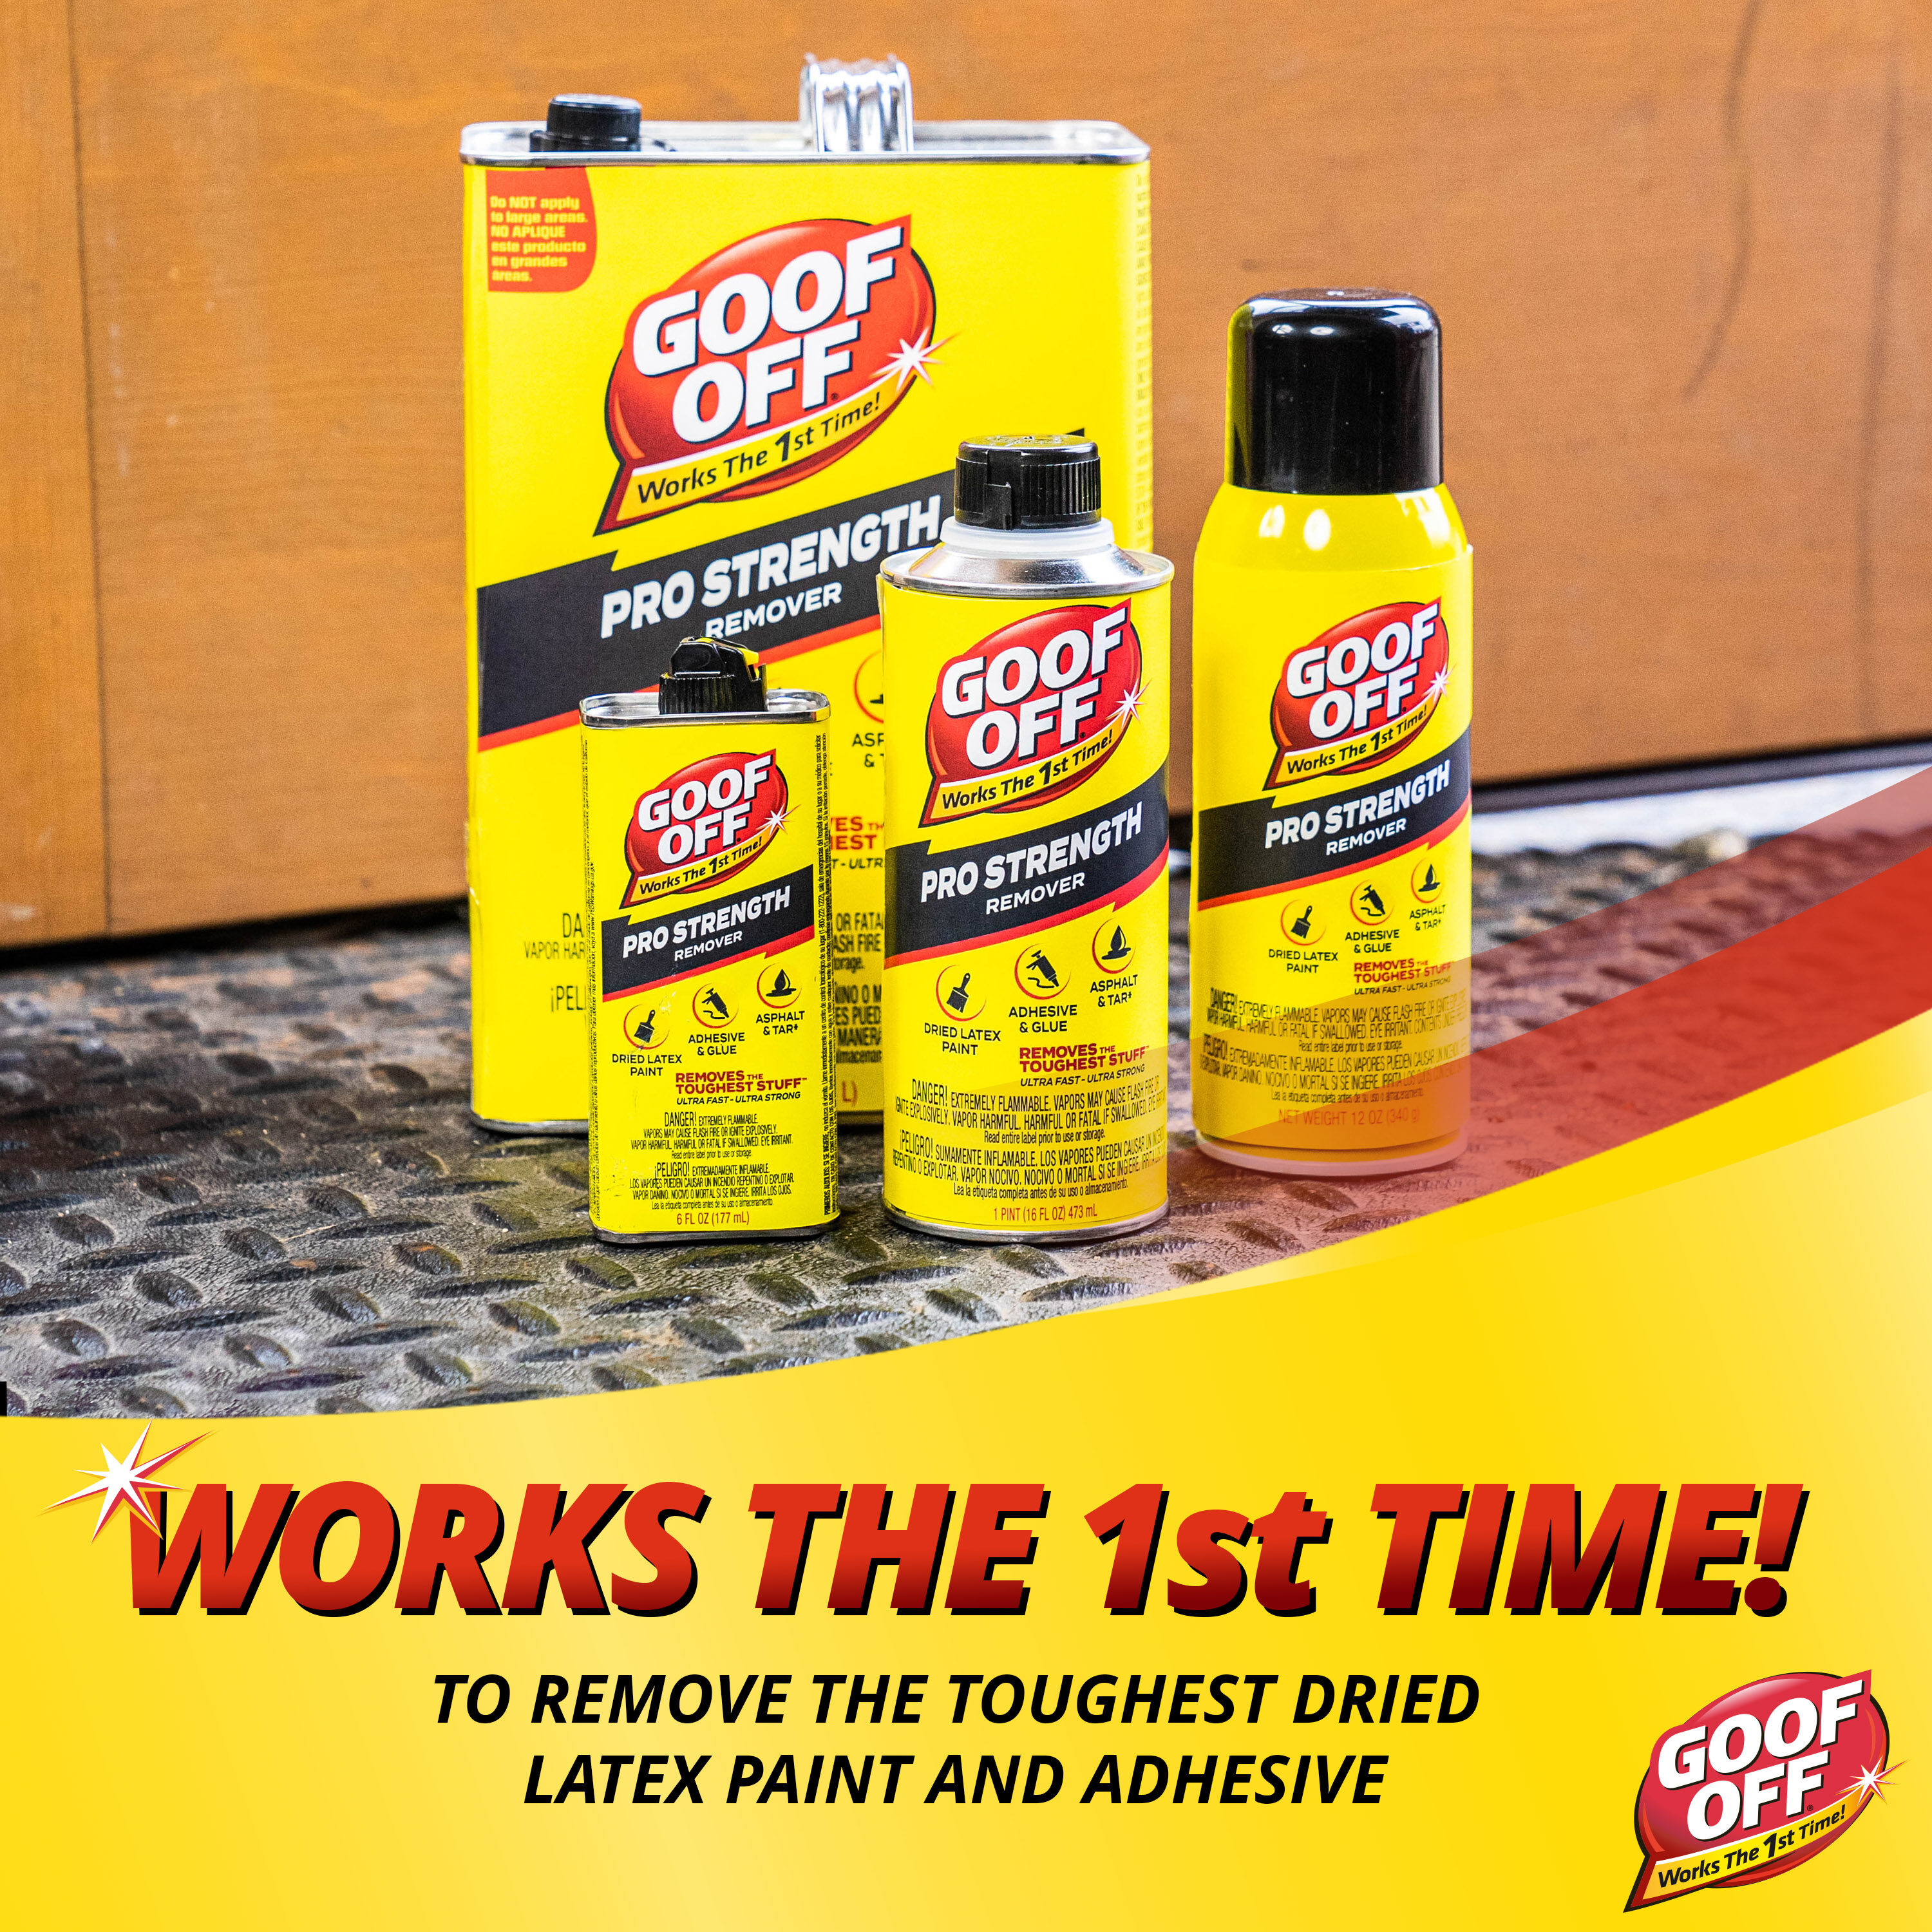 Goof Off 12-fl oz Adhesive Remover, Removes Latex Paint & Tough Adhesives, Aerosol Spray, Works Faster & Better, For Baseboards, Wood, Metal,  Glass, Brick, Liquid